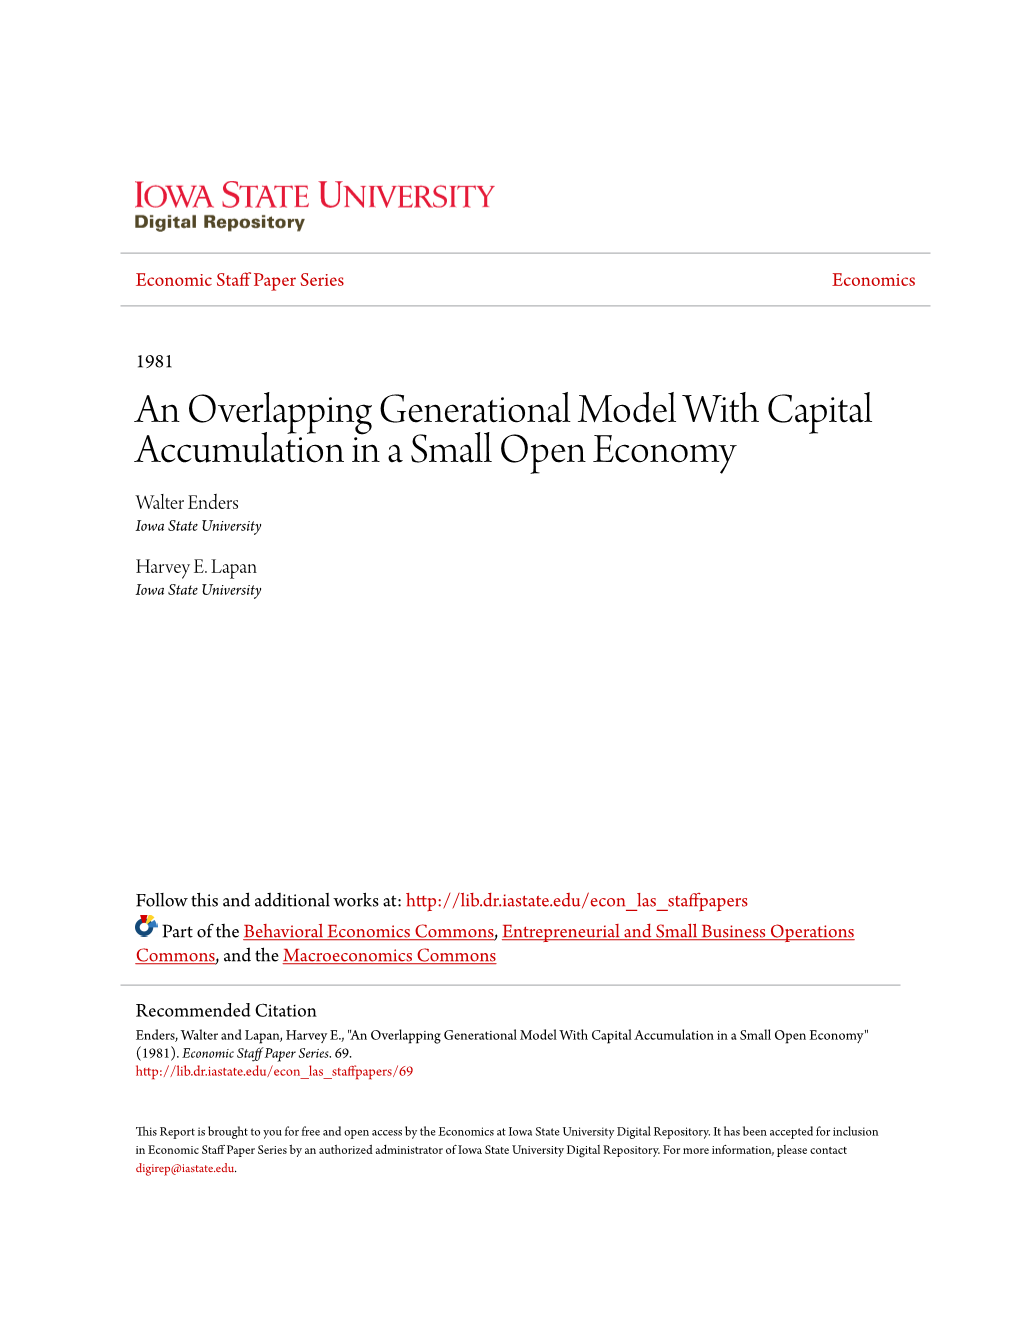 An Overlapping Generational Model with Capital Accumulation in a Small Open Economy Walter Enders Iowa State University